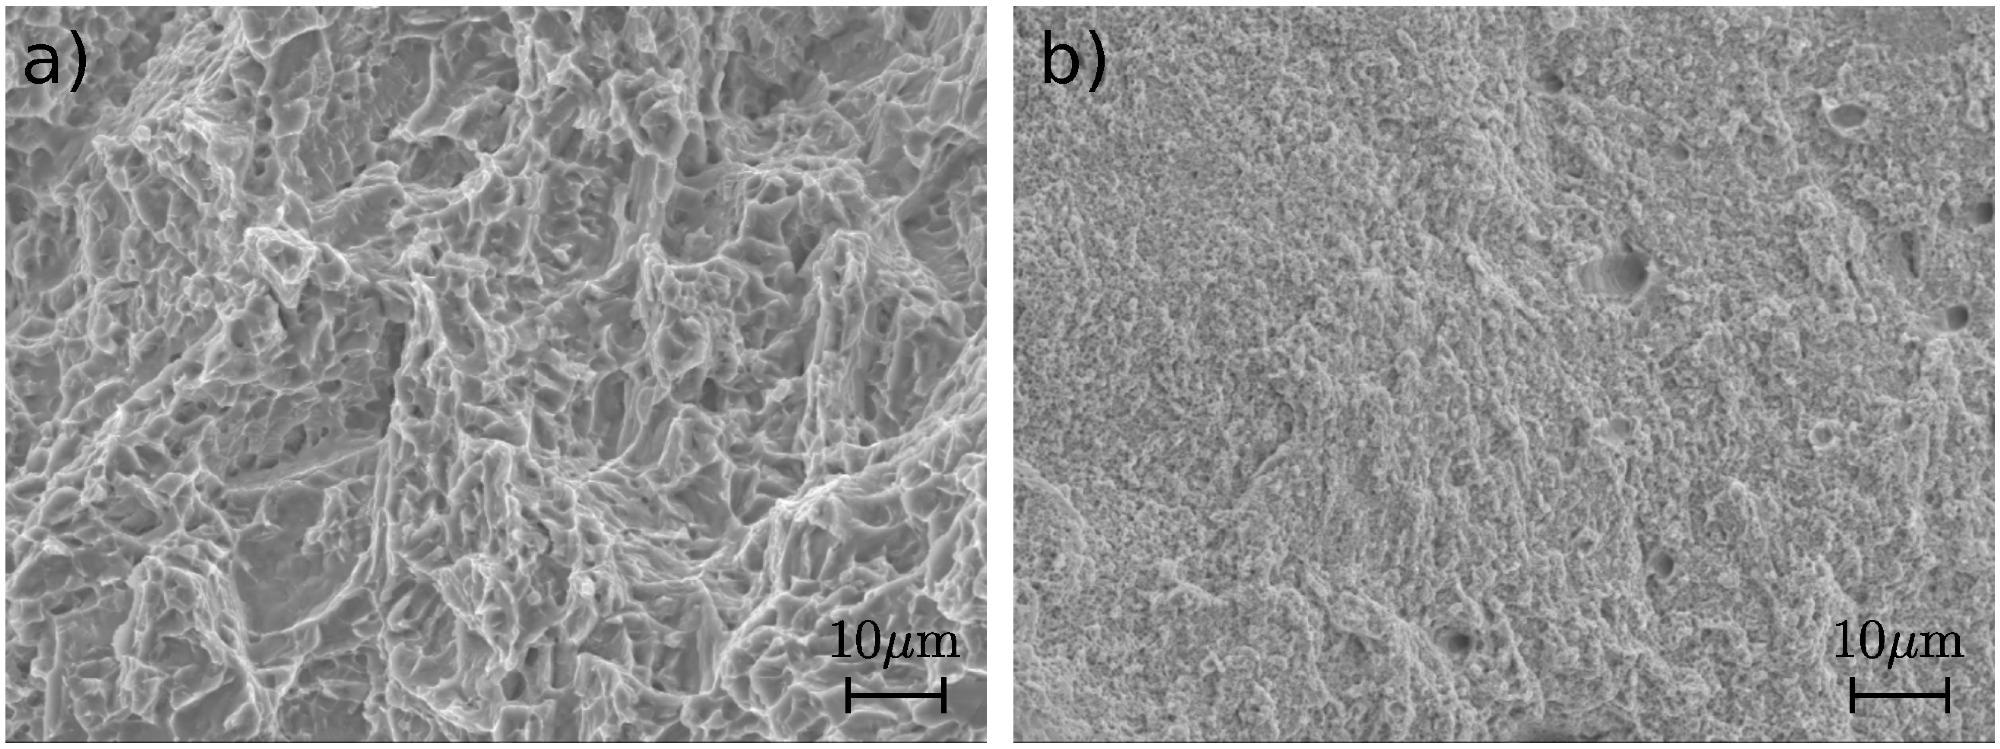 Micrographs of fracture surfaces of specimens after tensile testing in (a) Ti6Al4V titanium alloy and (b) 316L stainless steel.